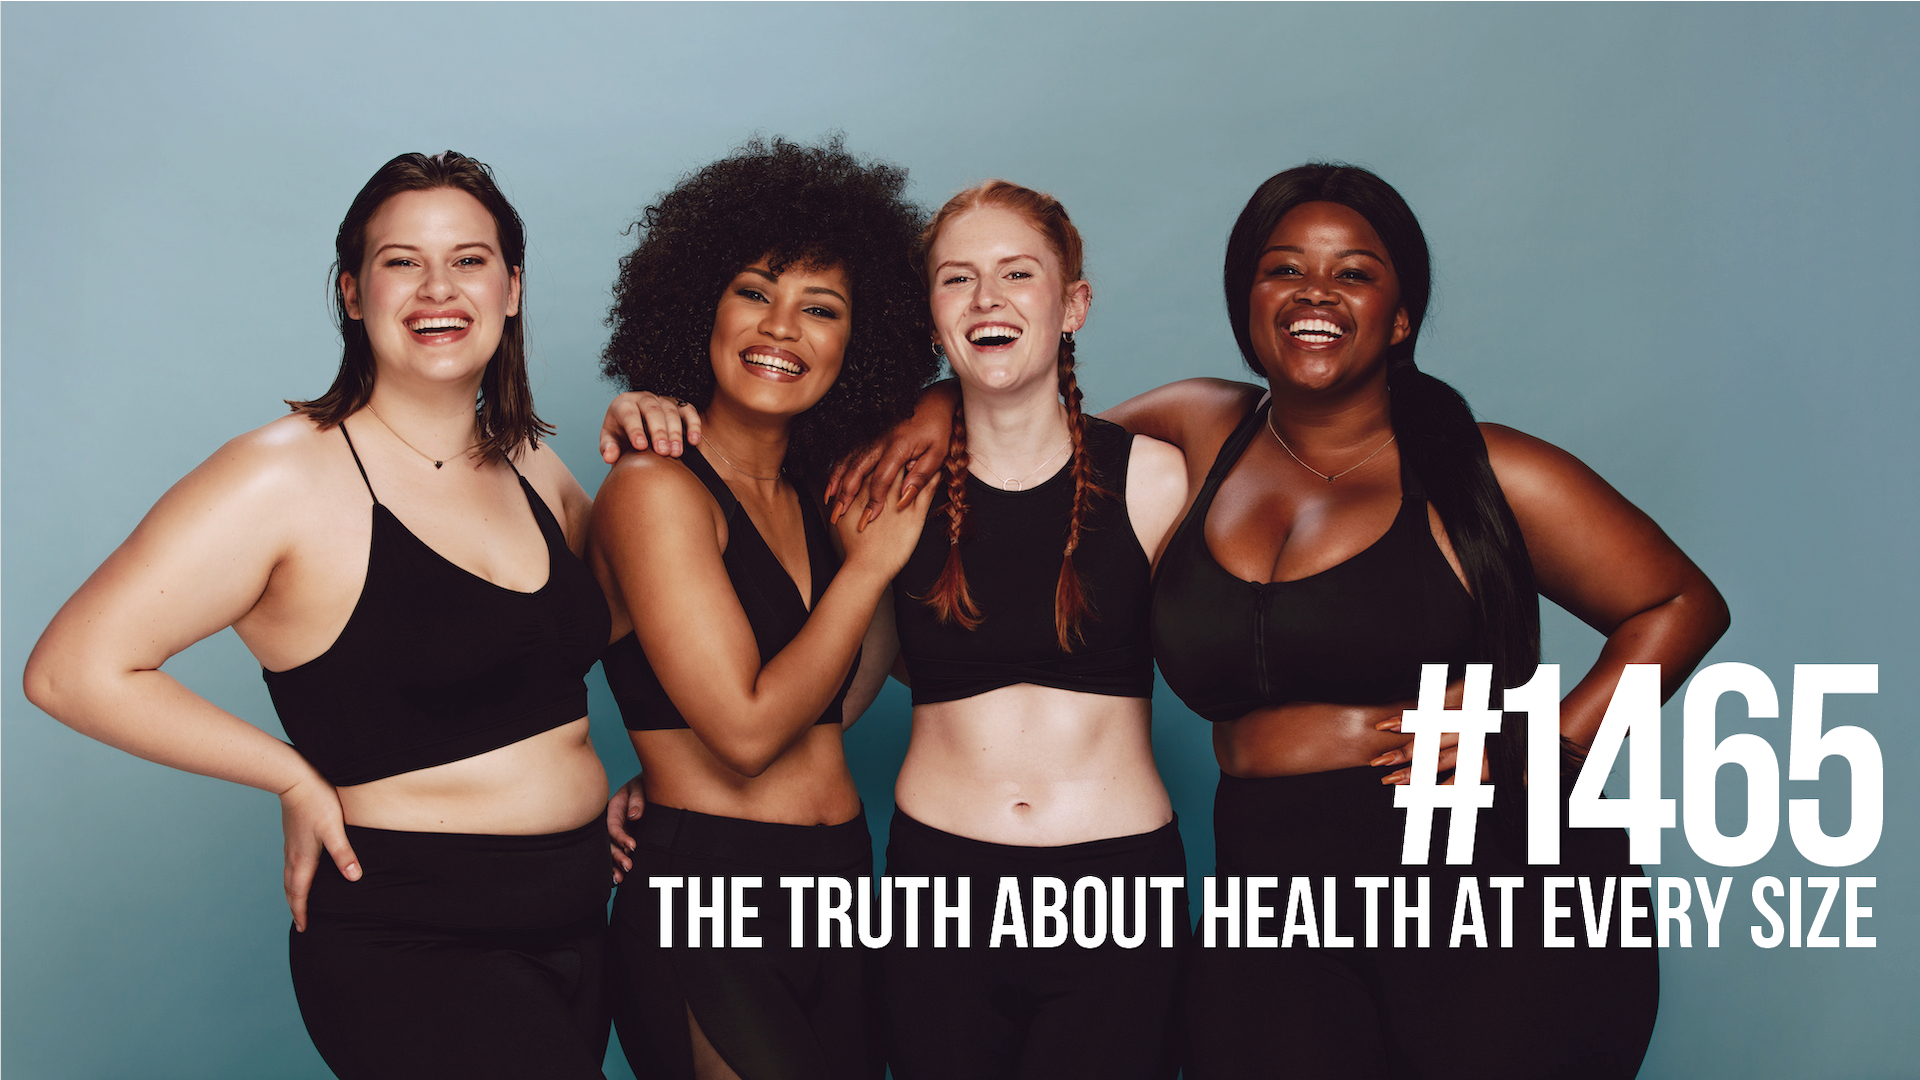 1465: The Truth About Health at Every Size